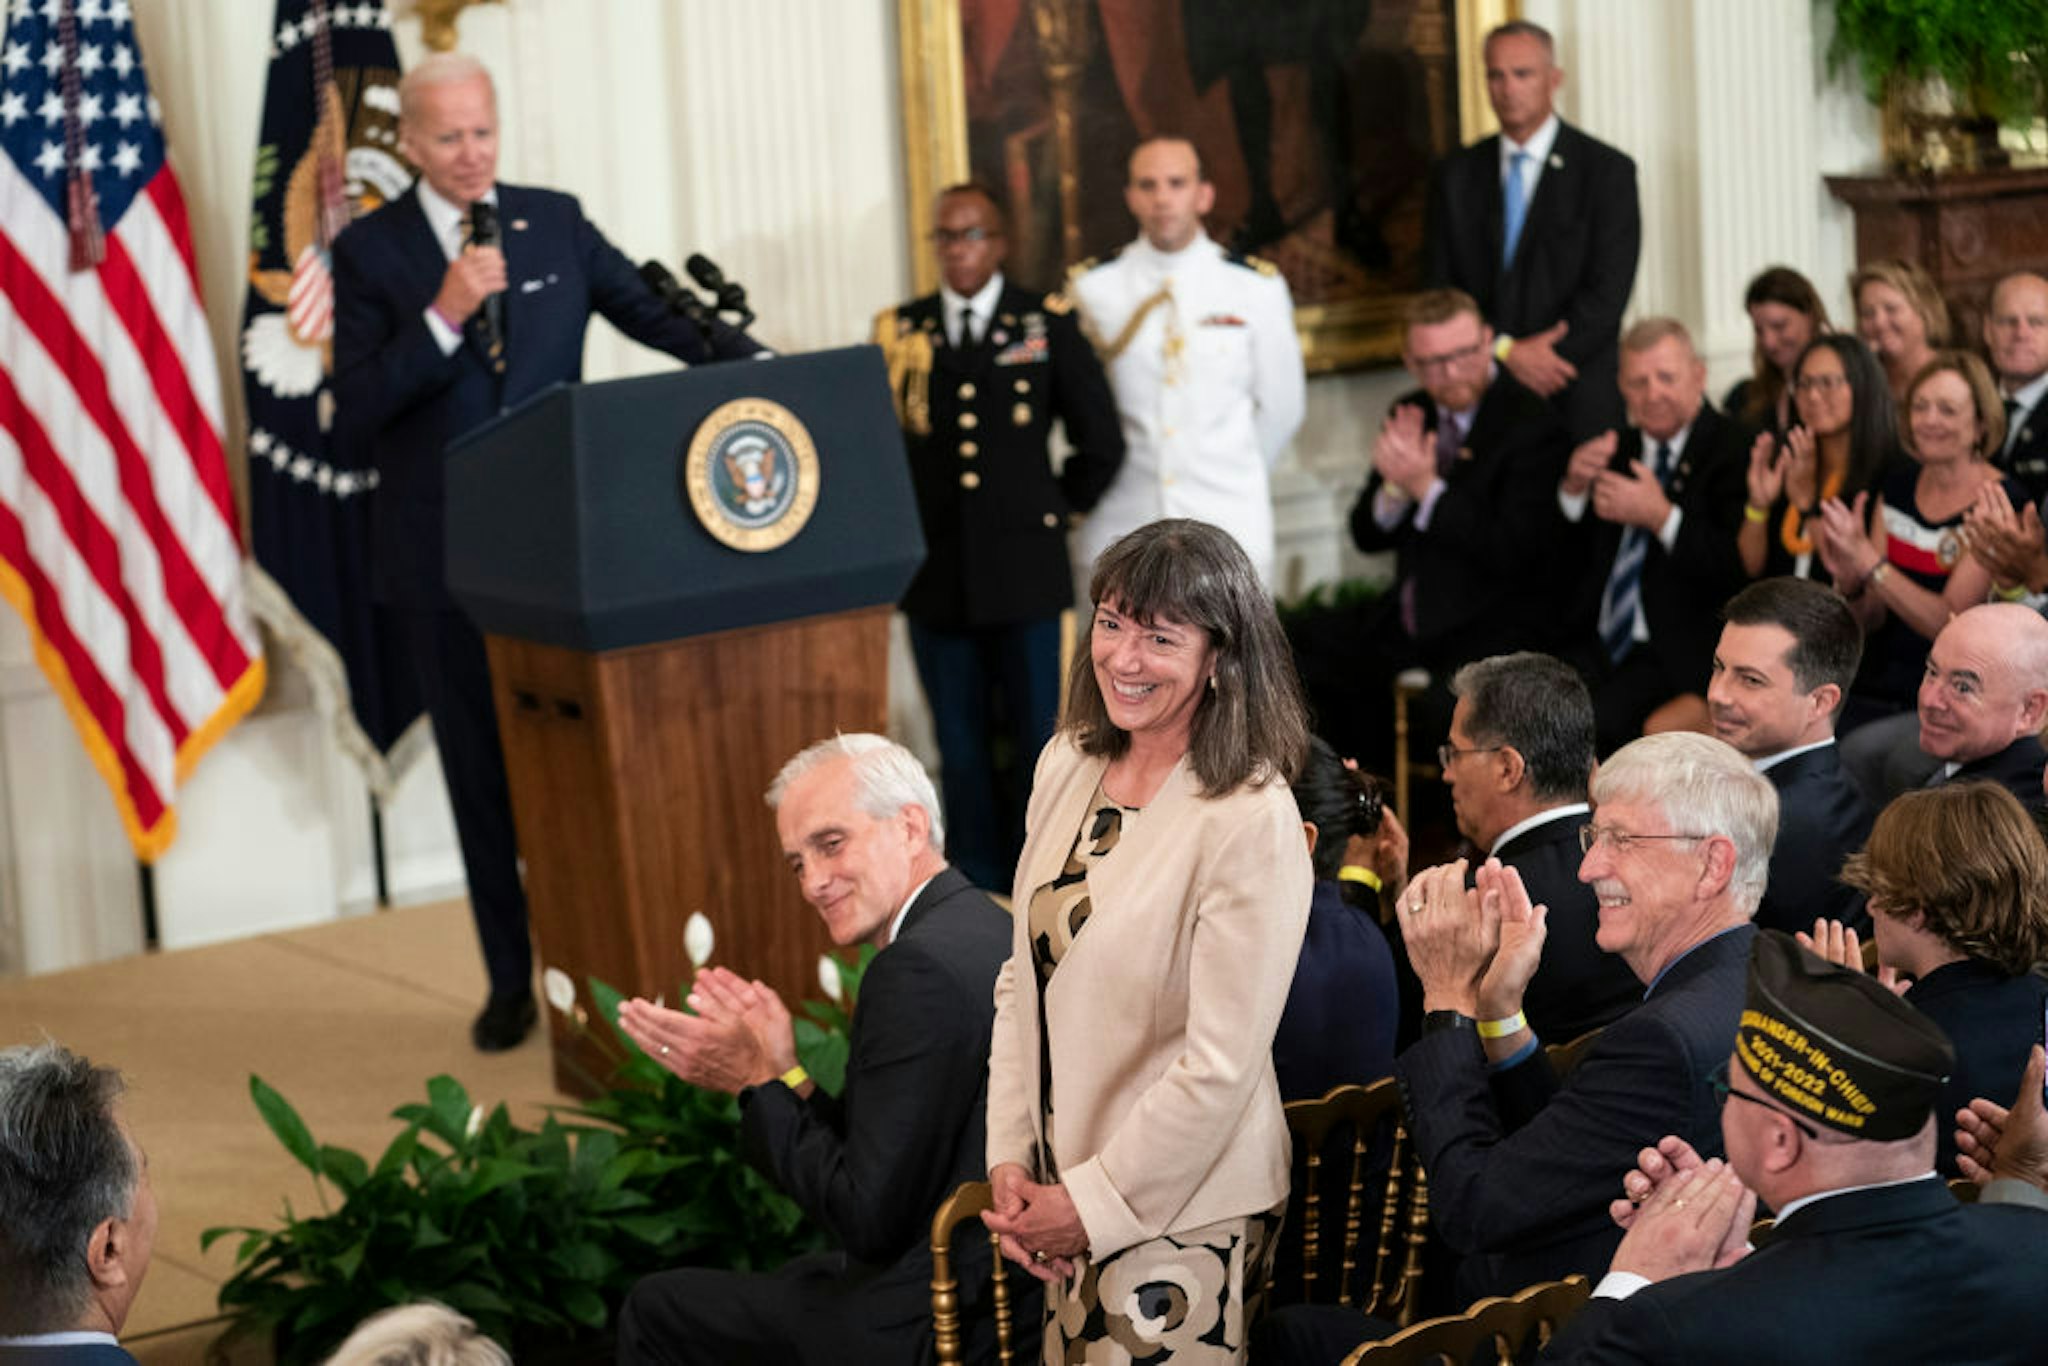 WASHINGTON, UNITED STATES - AUG 10: Monica Bertagnolli, newly appointed director of the National Cancer Institute, stands for recognition during remarks by President Joe Biden before signing S. 3373, the Sergeant First Class Heath Robinson Honoring our Promises to Address Comprehensive Toxics (PACT) Act of 2022, into law in the East Room of the White House in Washington, D.C., on Wednesday Aug. 10, 2022. (